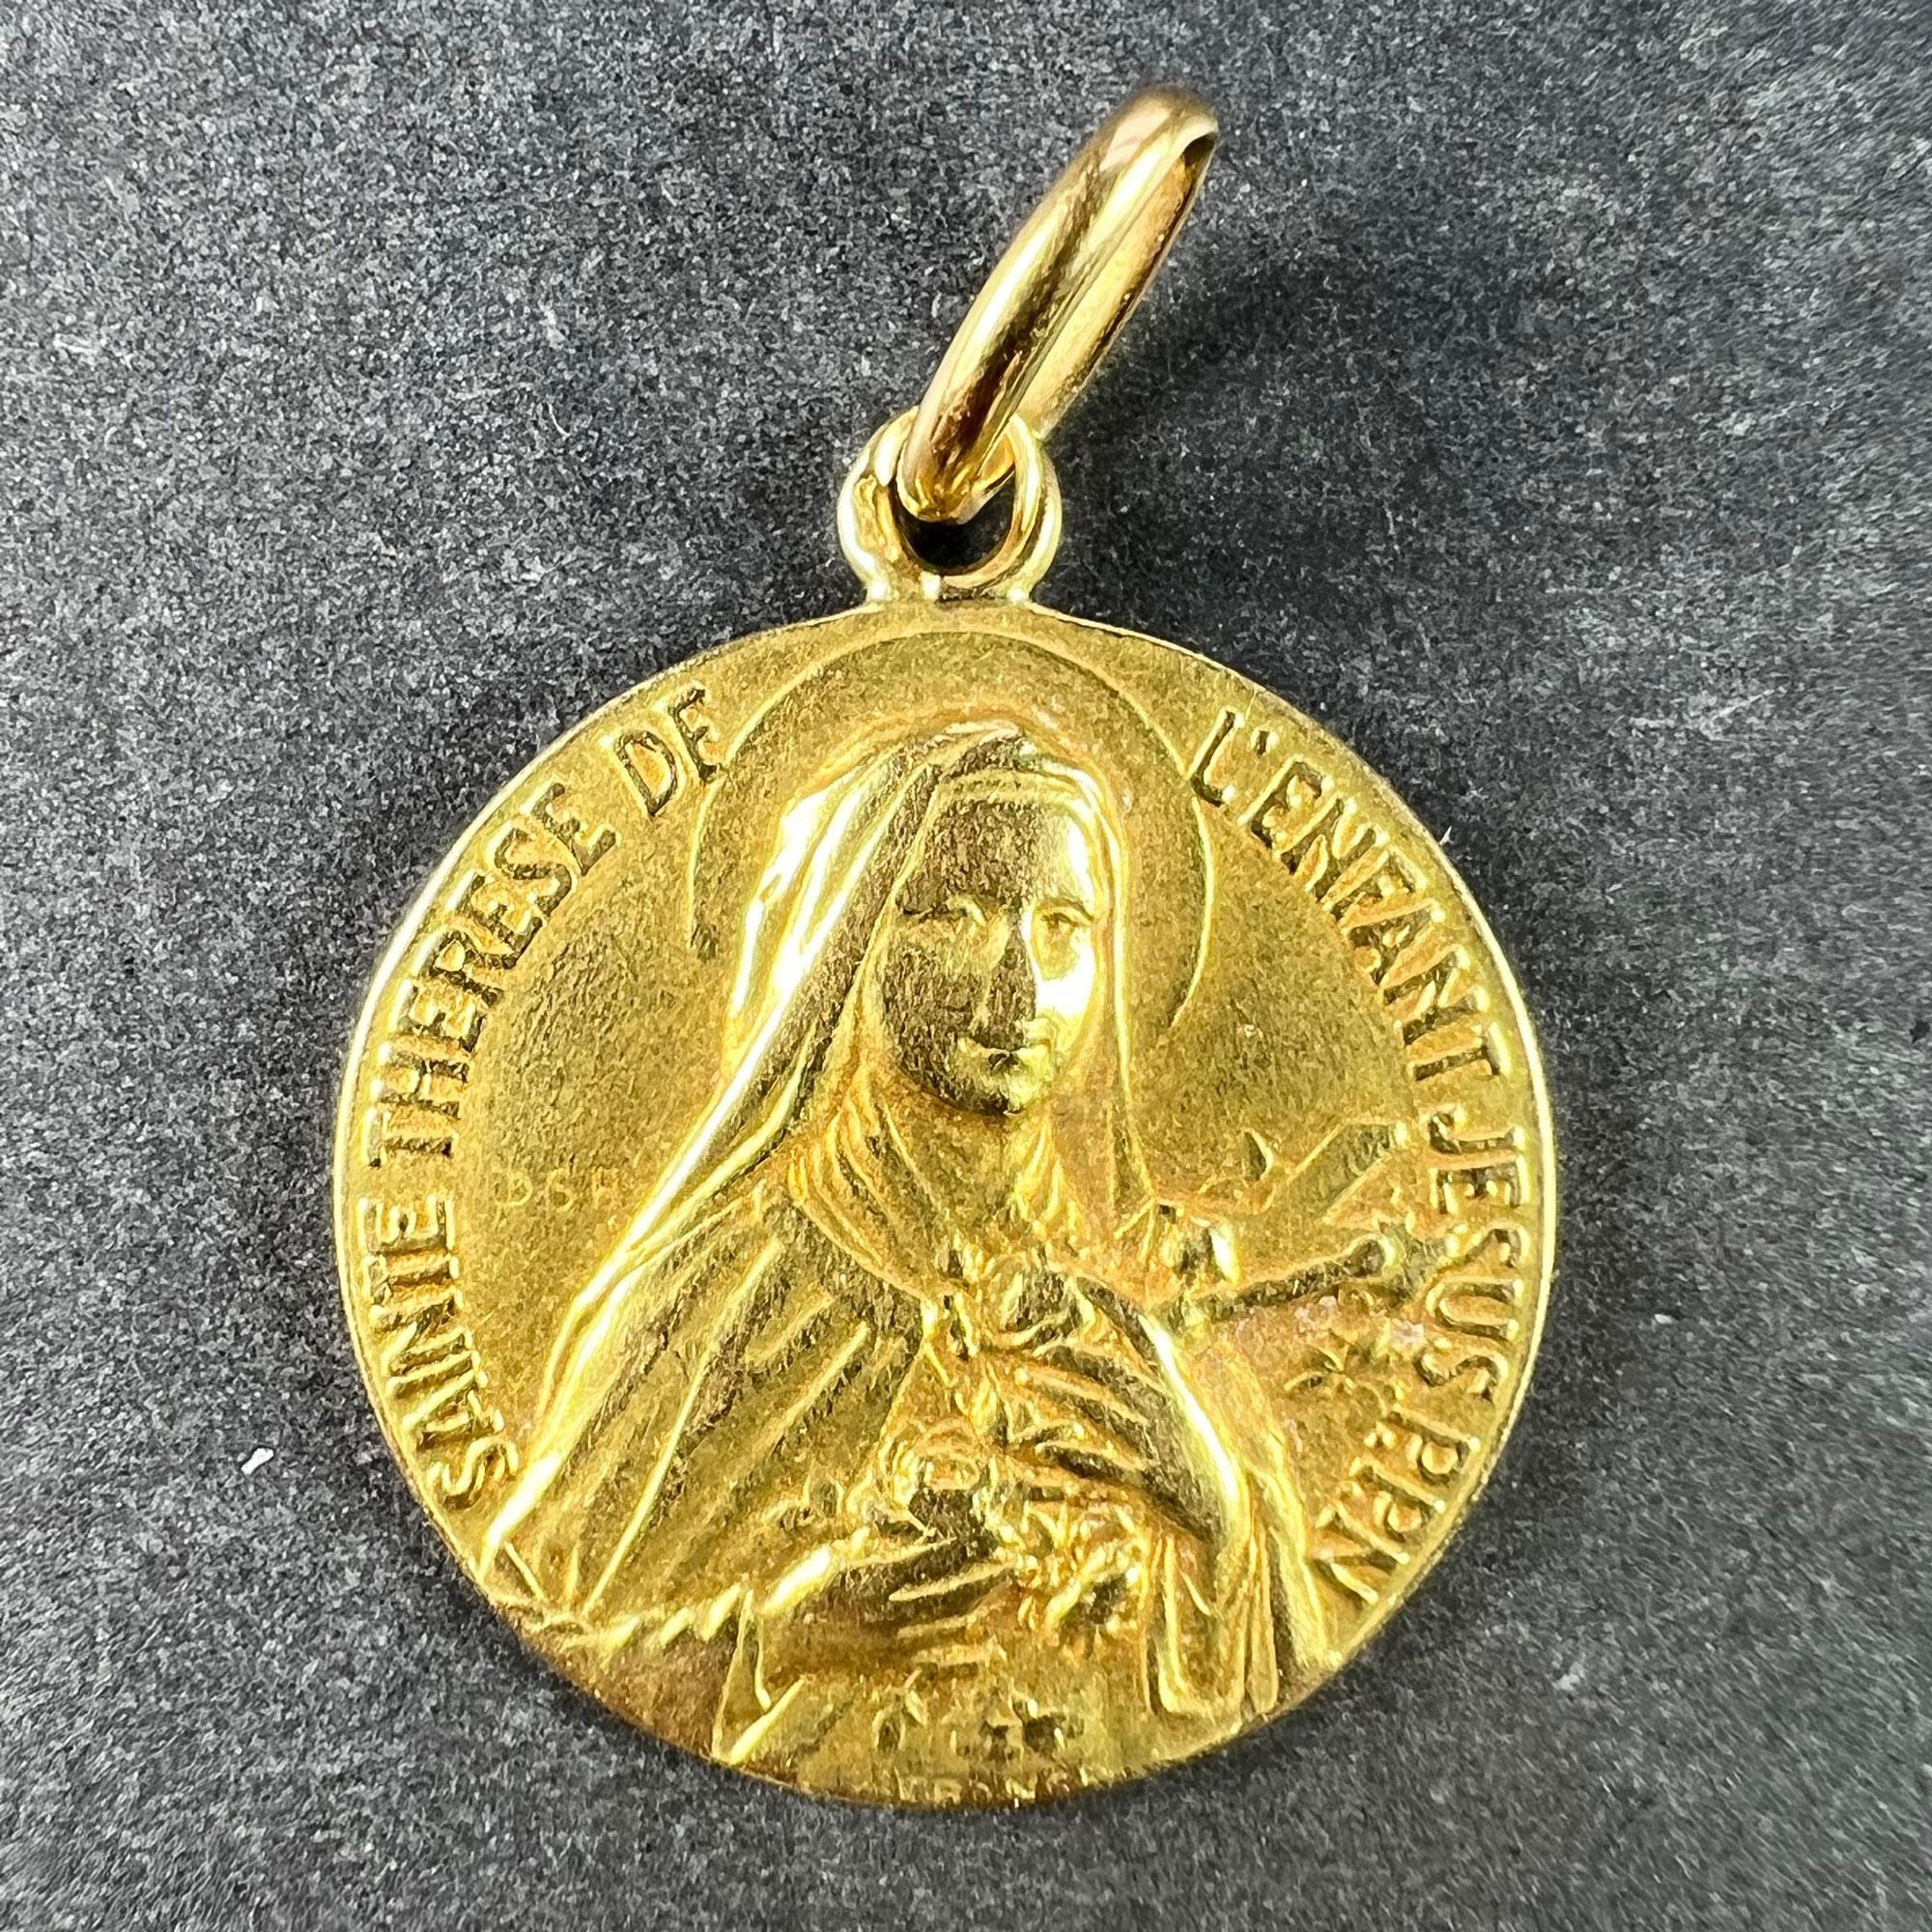 A French 18 karat (18K) yellow gold charm pendant designed as a religious medal depicting Saint Therese with the motto 'SAINTE THERESE DE L'ENFANT JESUS PPN'. St Therese is shown holding flowers and a crucifix; and was known as 'The little flower of